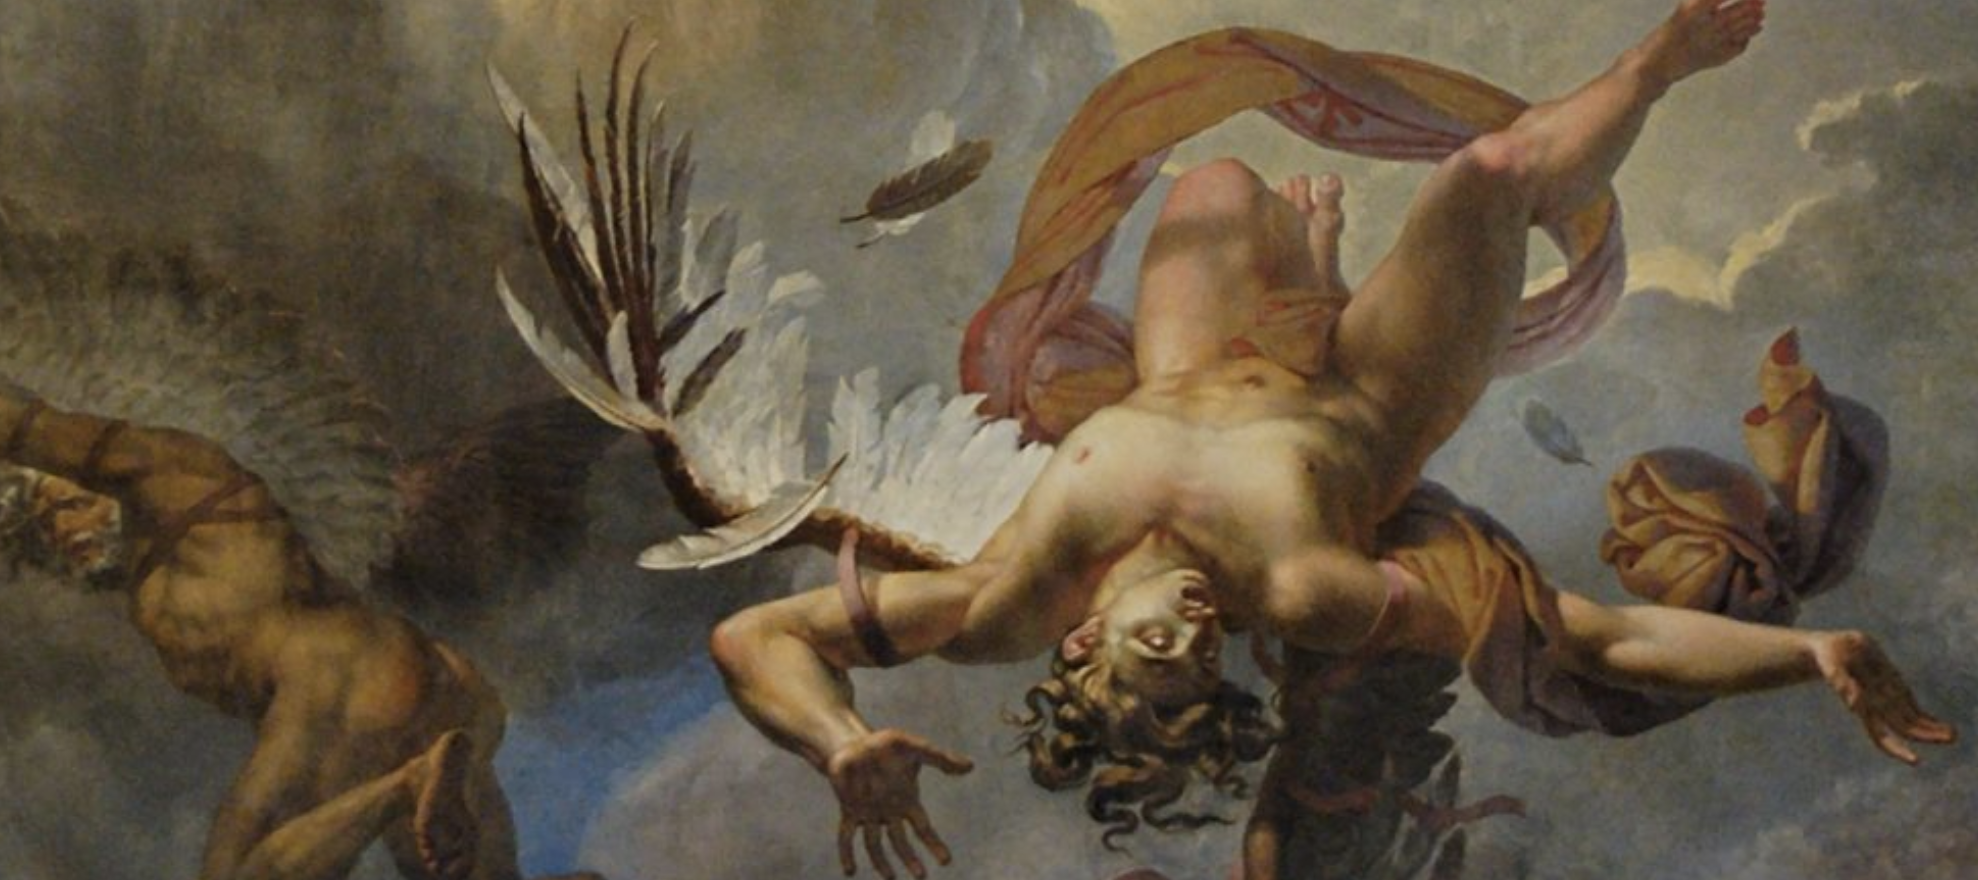 The Myth of Icarus